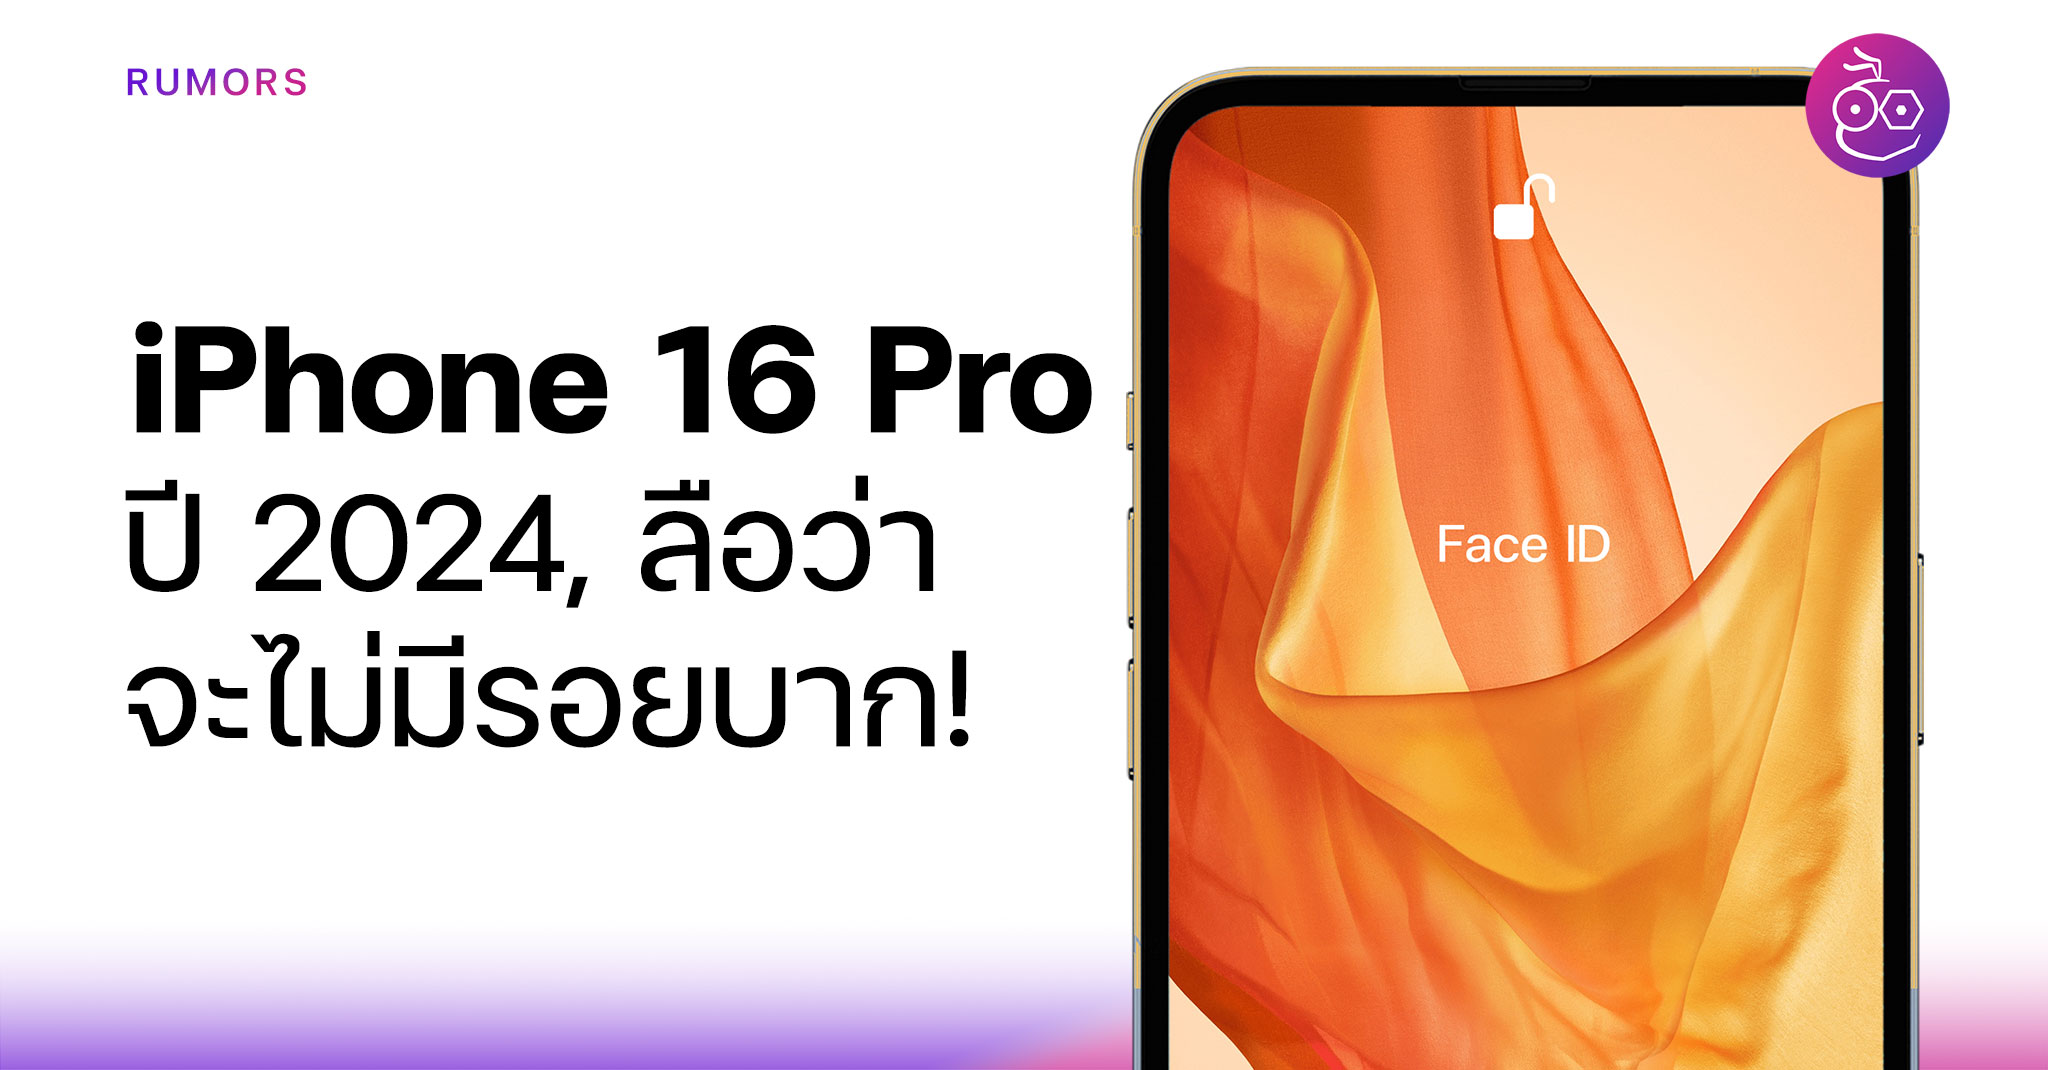 (Rumor) 2024 iPhone 16 Pro may not have a notch, switch to Face ID